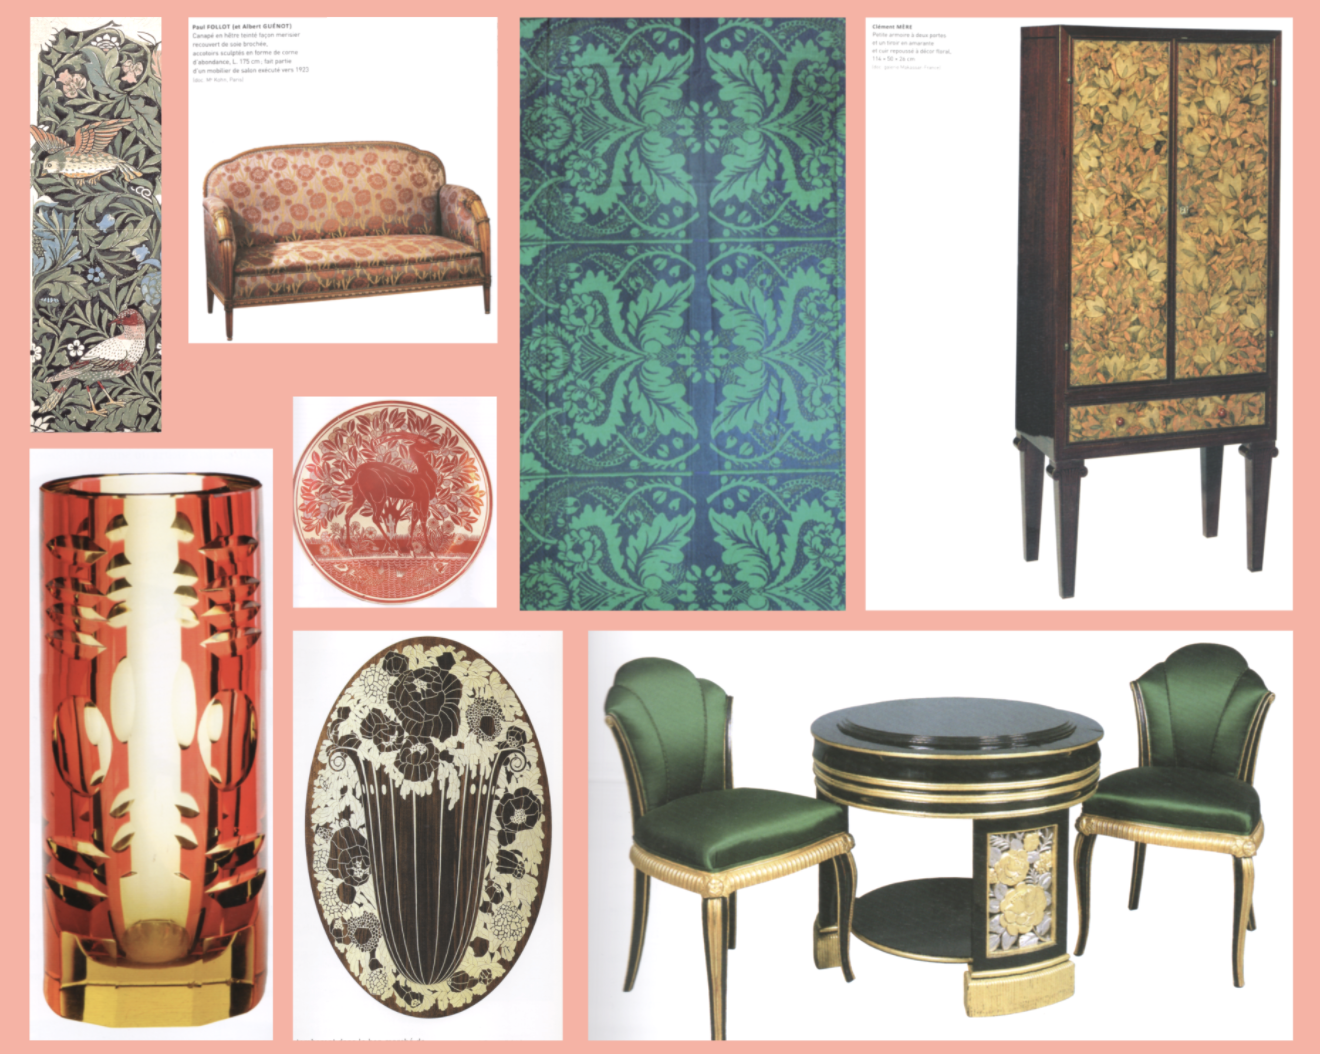 Excerpts from our works concerning the Art Deco period and the decorative arts in general.